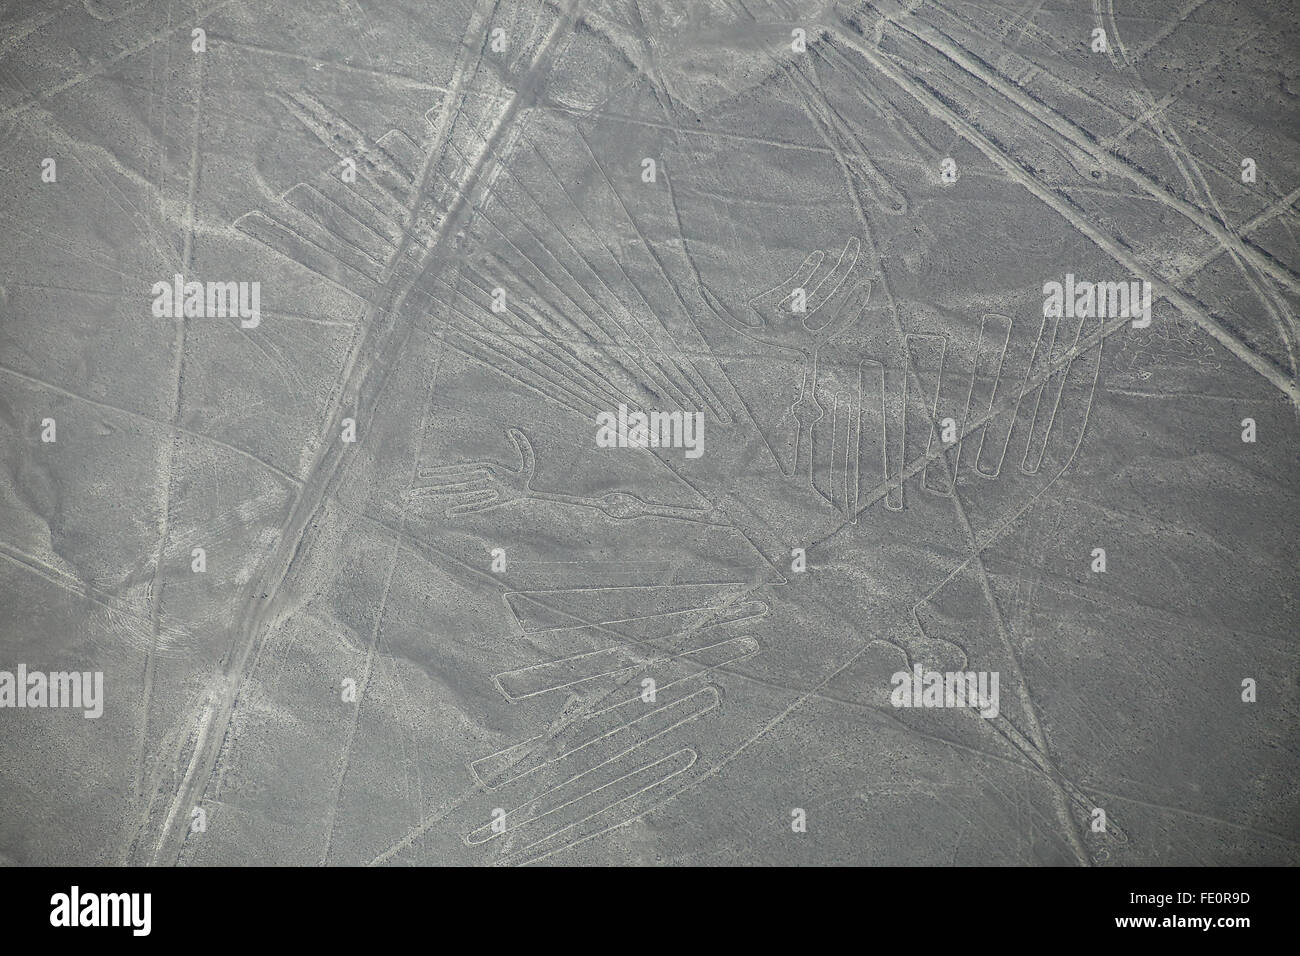 Aerial view of Nazca Lines geoglyphs in Peru. The Lines were designated as a UNESCO World Heritage Site in 1994. Stock Photo